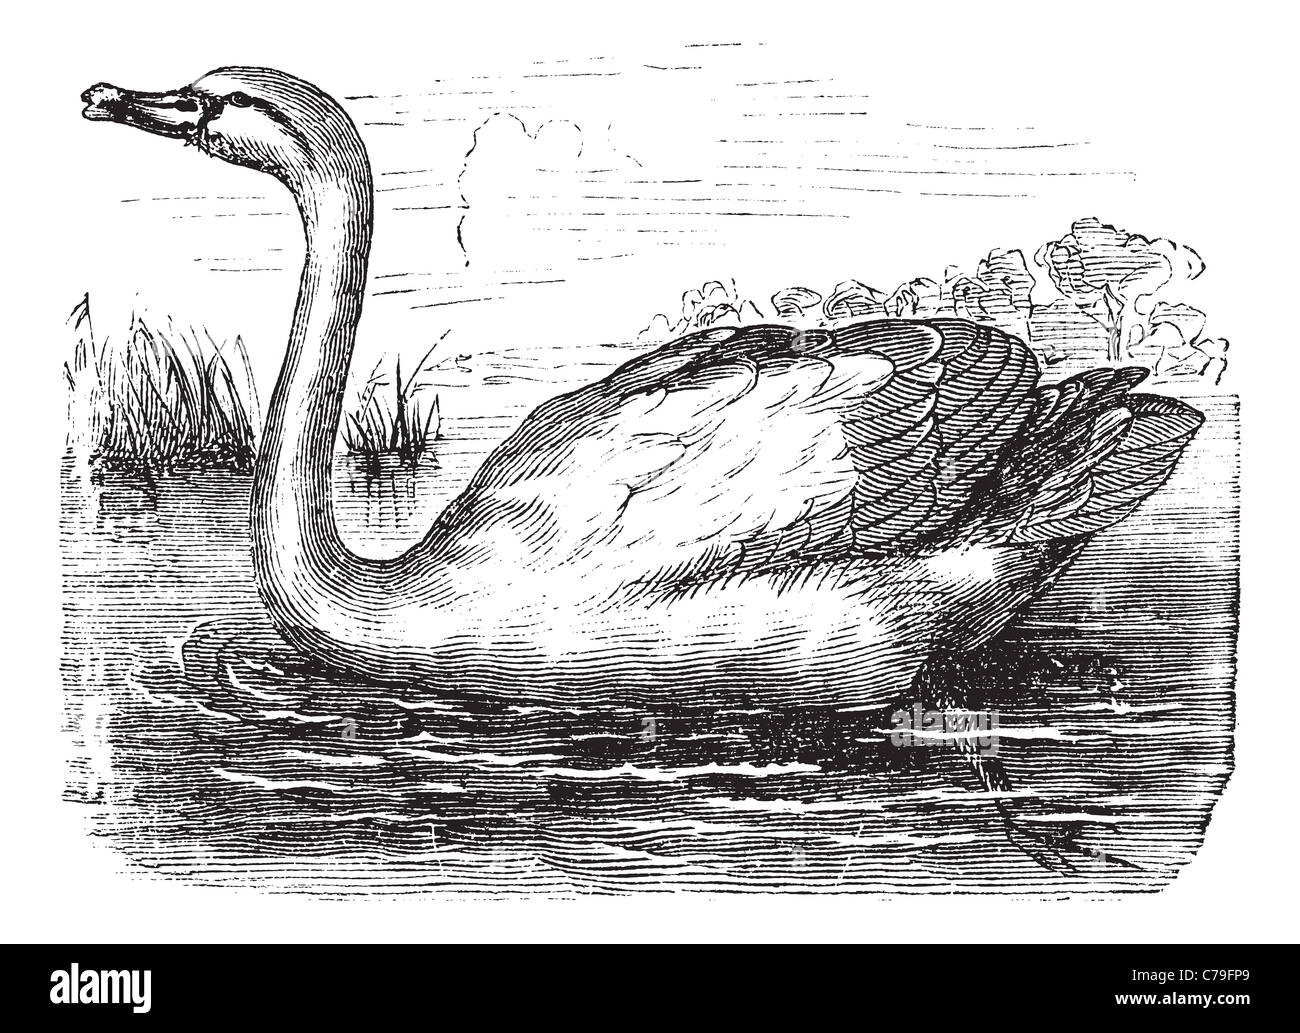 Mute Swan or Cygnus olor, vintage engraving. Old engraved illustration of a Mute Swan. Stock Photo